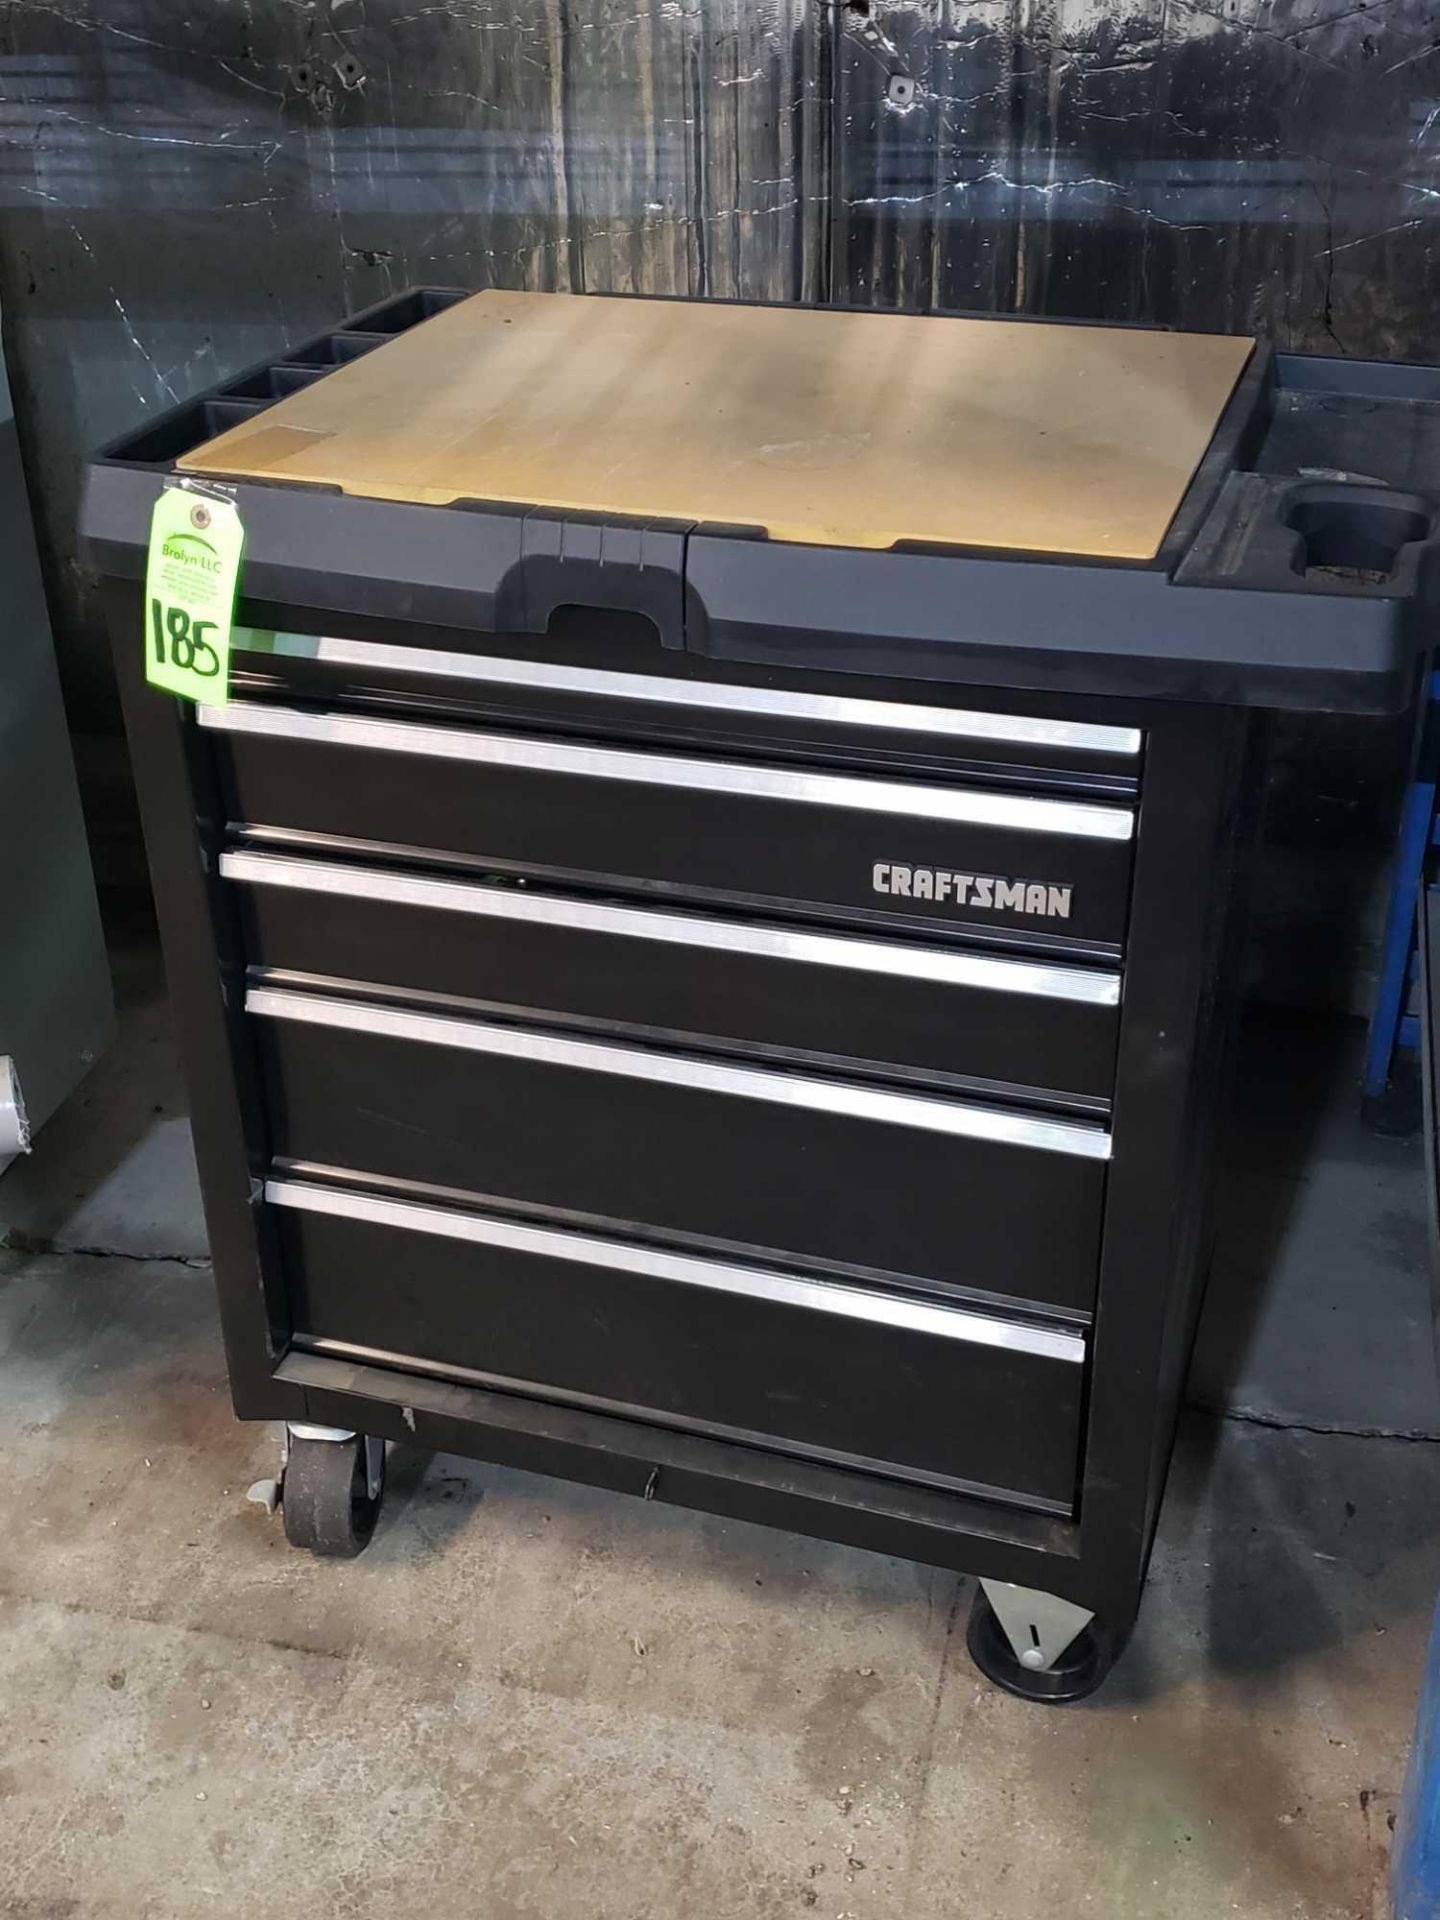 Craftsman rolling tool box. Appears to be almost new.